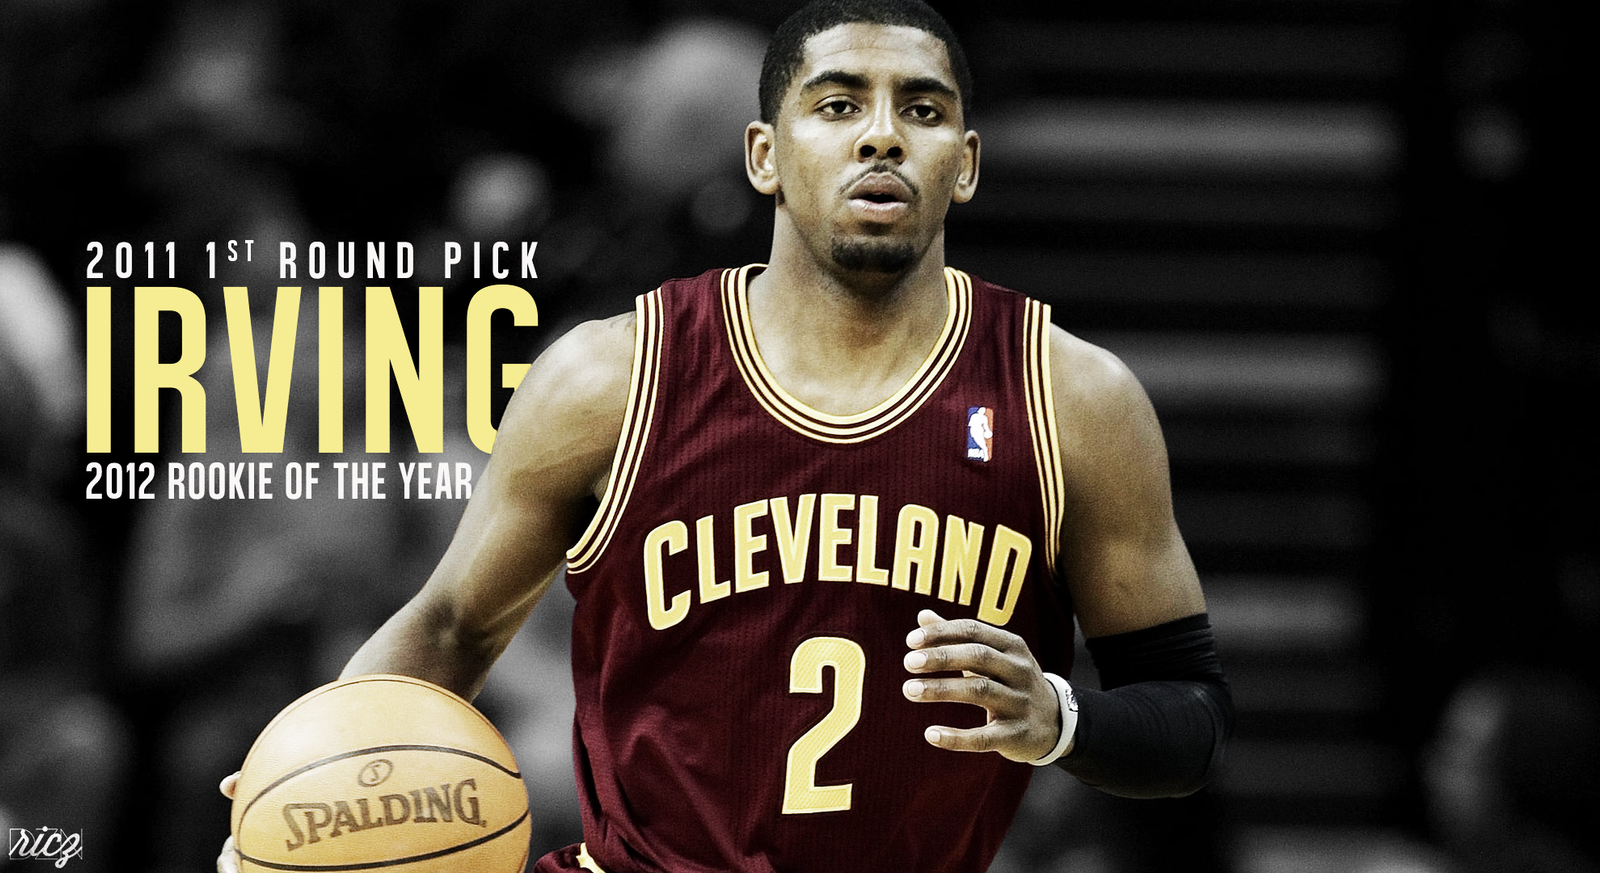 Kyrie Irving Quotes. QuotesGram